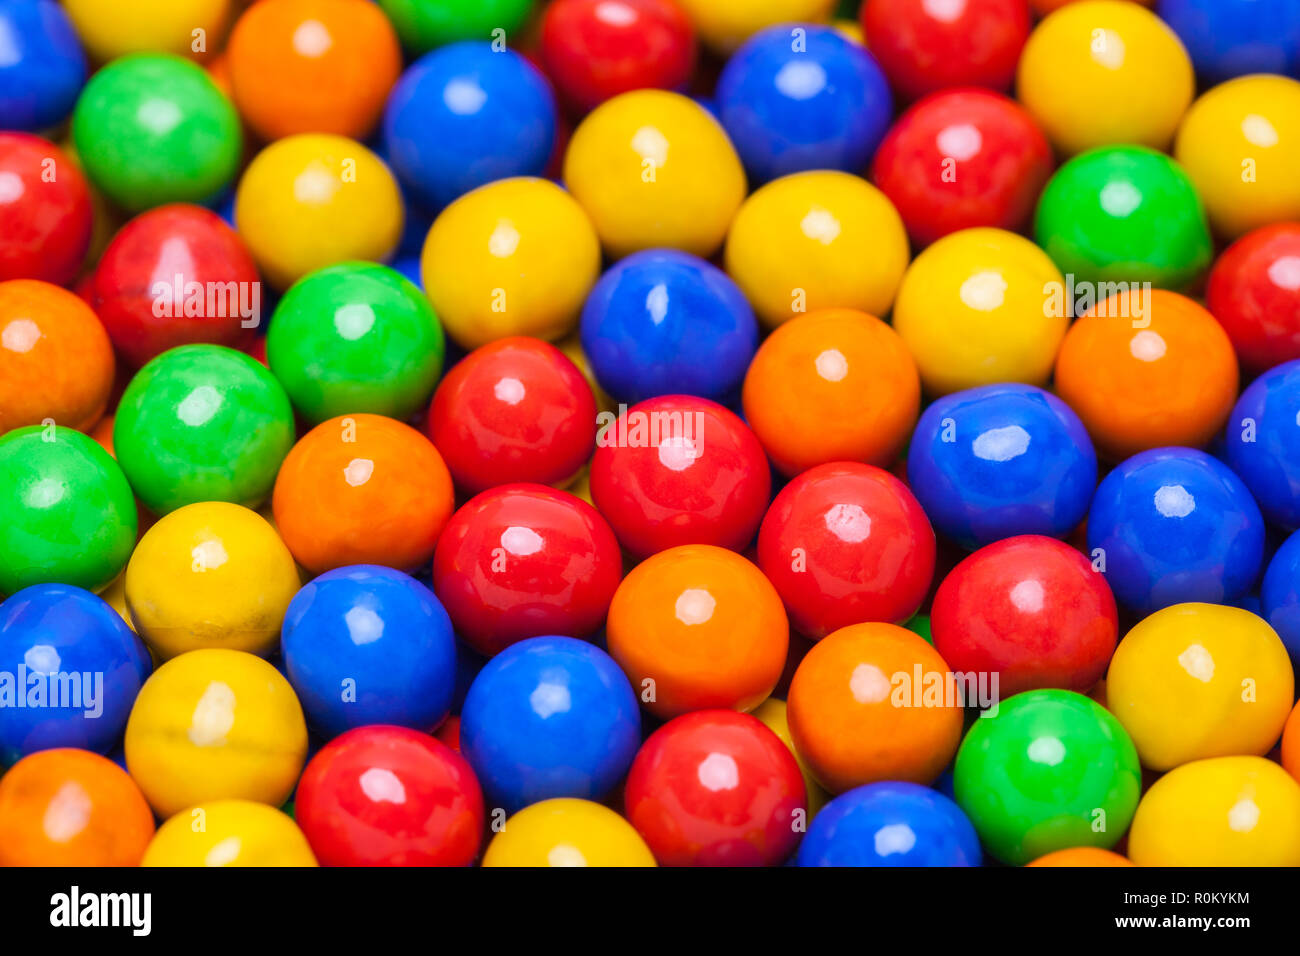 Colorful Round Candy Balls in a Pile. Stock Photo